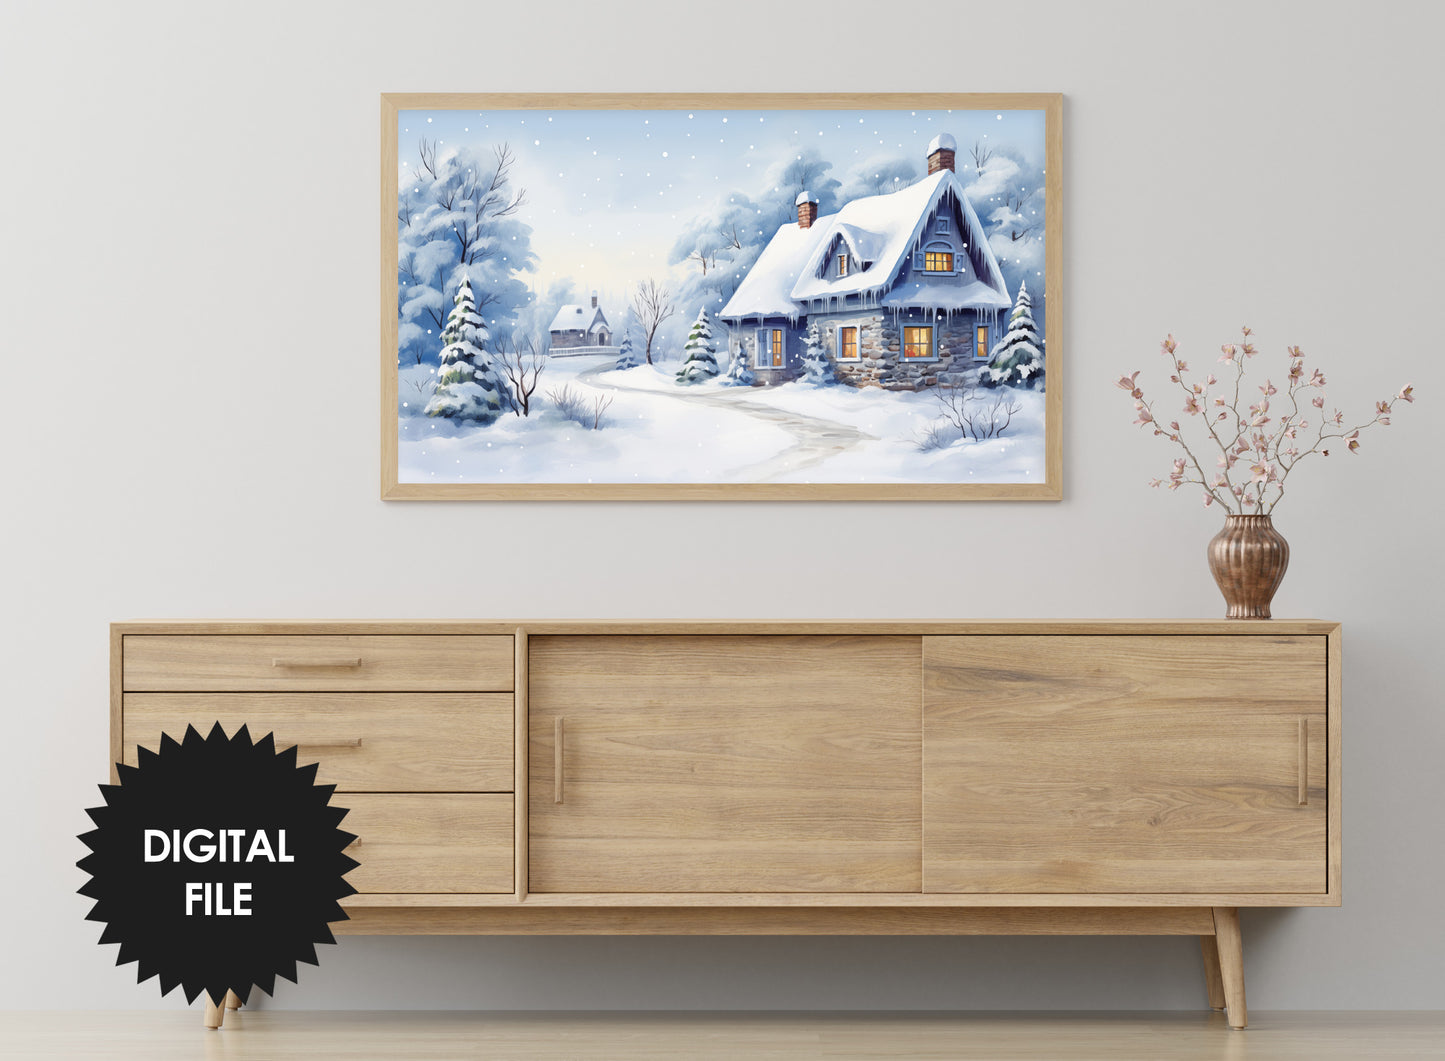 Christmas Frame TV Art | Stone Cottage In The Snow | Digital TV Art | Digital Watercolor Painting | Instant Download JPEG